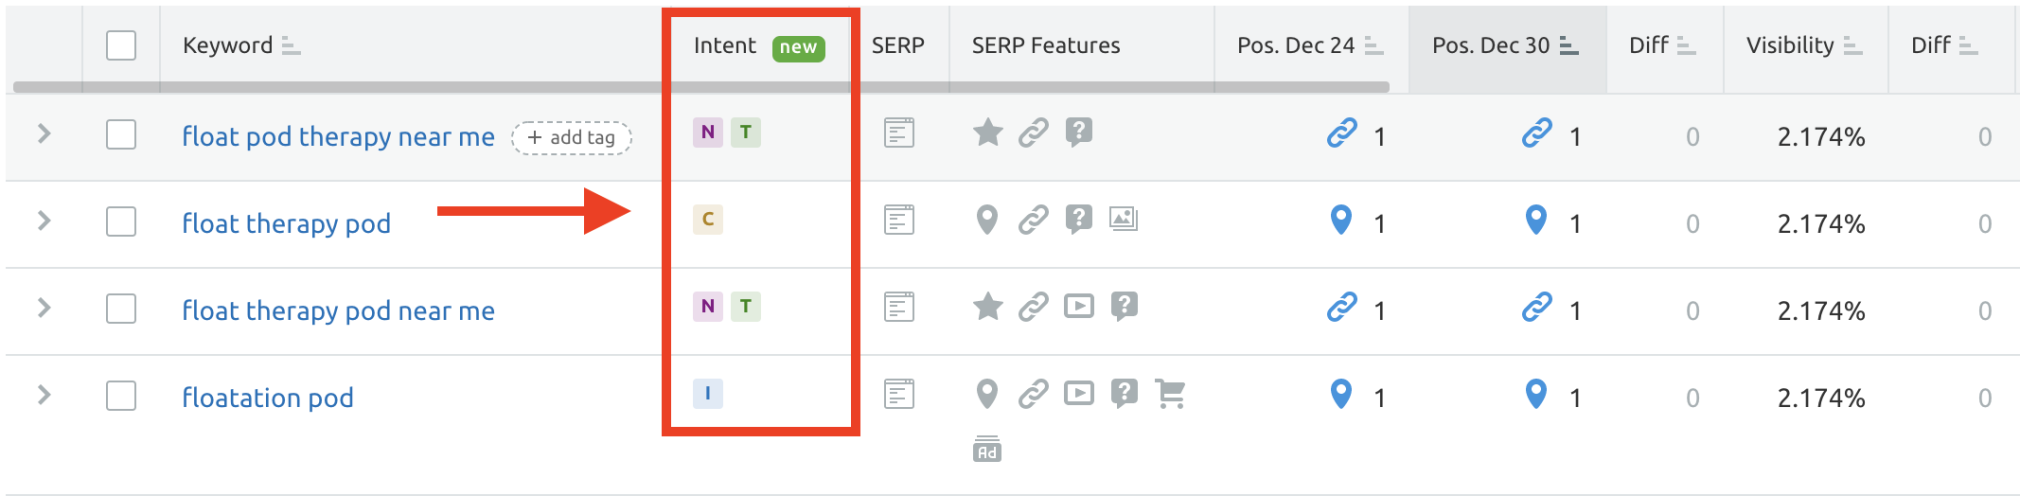 keyword intent feature